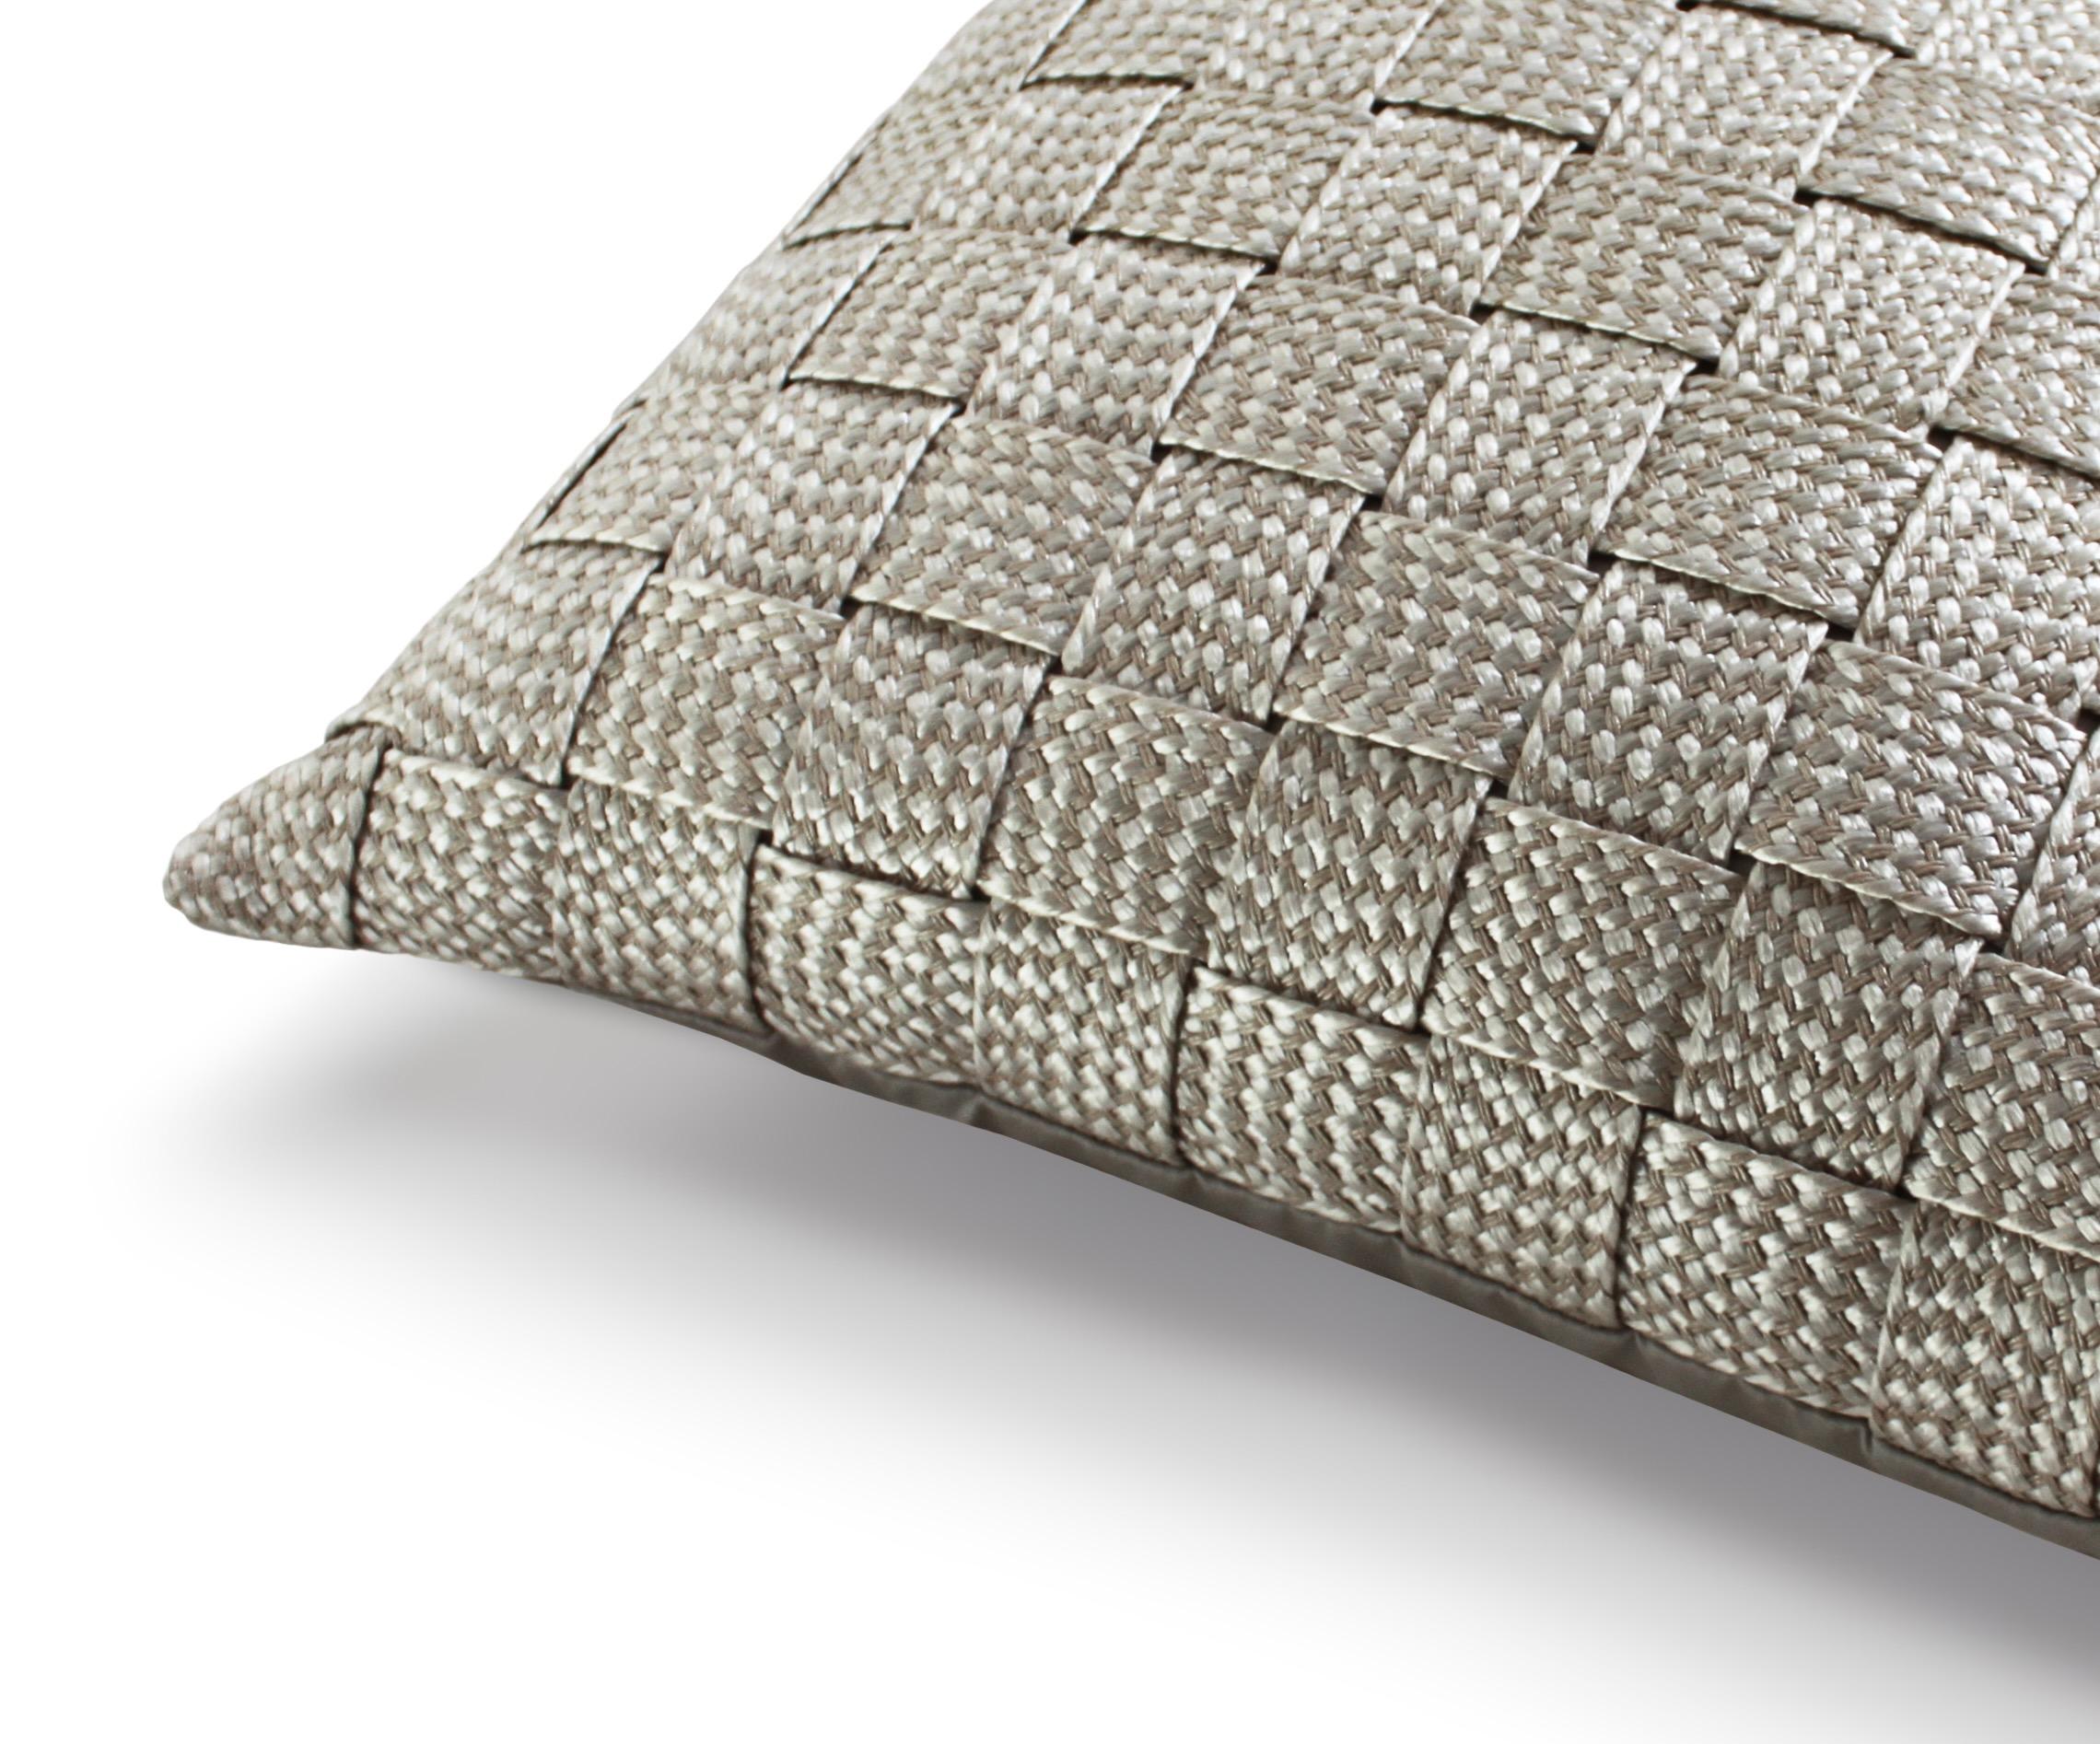 This beautiful raffia cushion is hand woven in our London studio and can be custom made to a larger or smaller size. There is a lustre to the raffia and the cushion is backed with the finest Italian cotton sateen. 

Shown here in a luxurious pearl